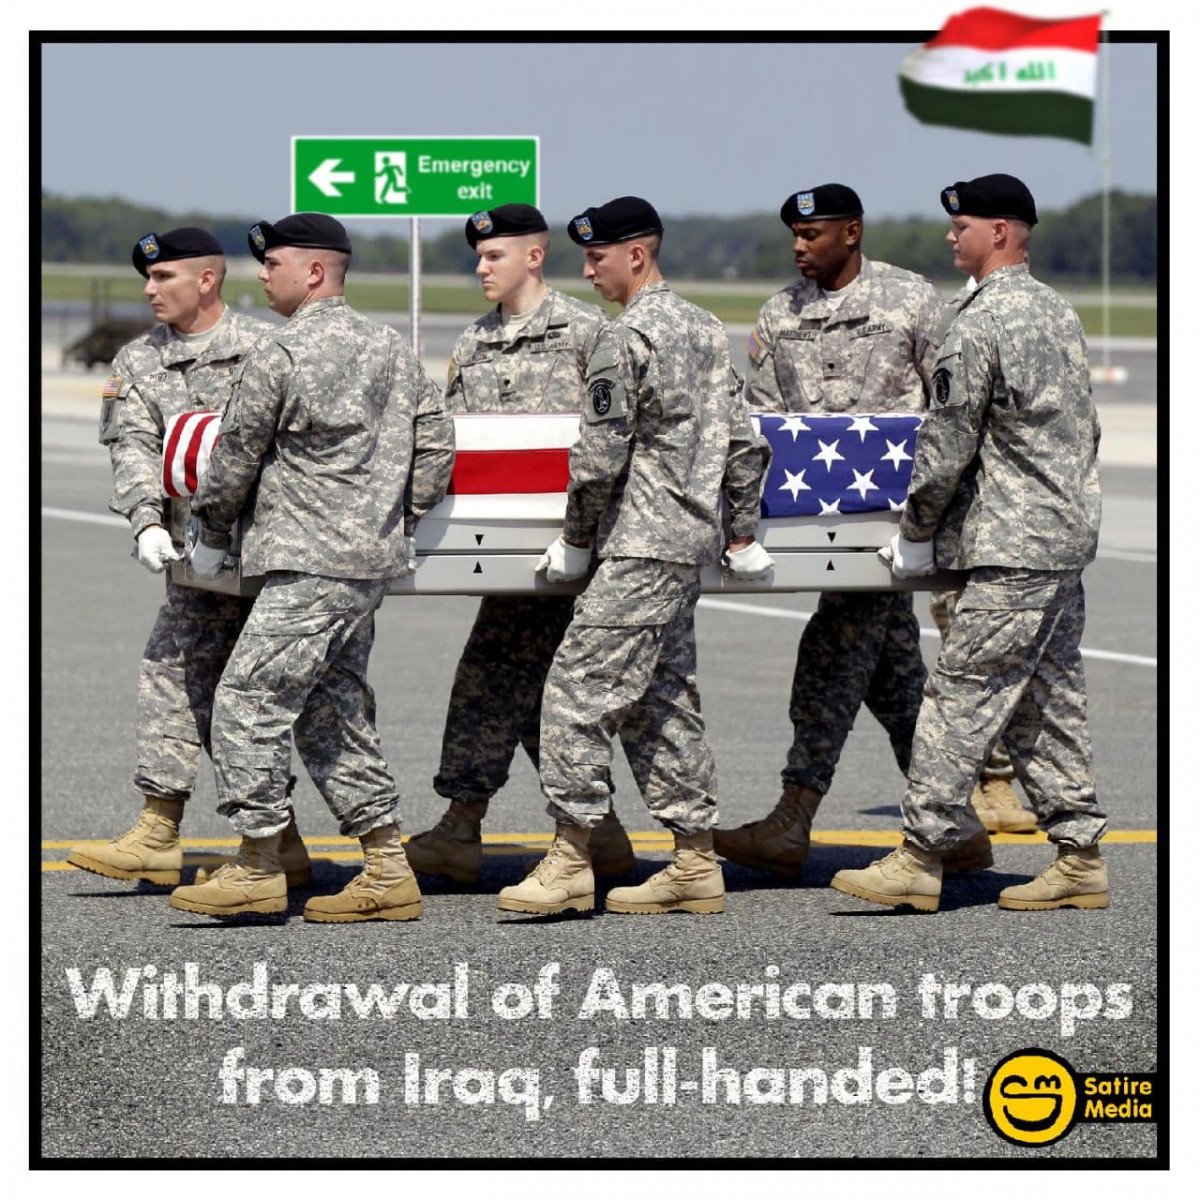 Withdrawal of American troops from Iraq, full-handed